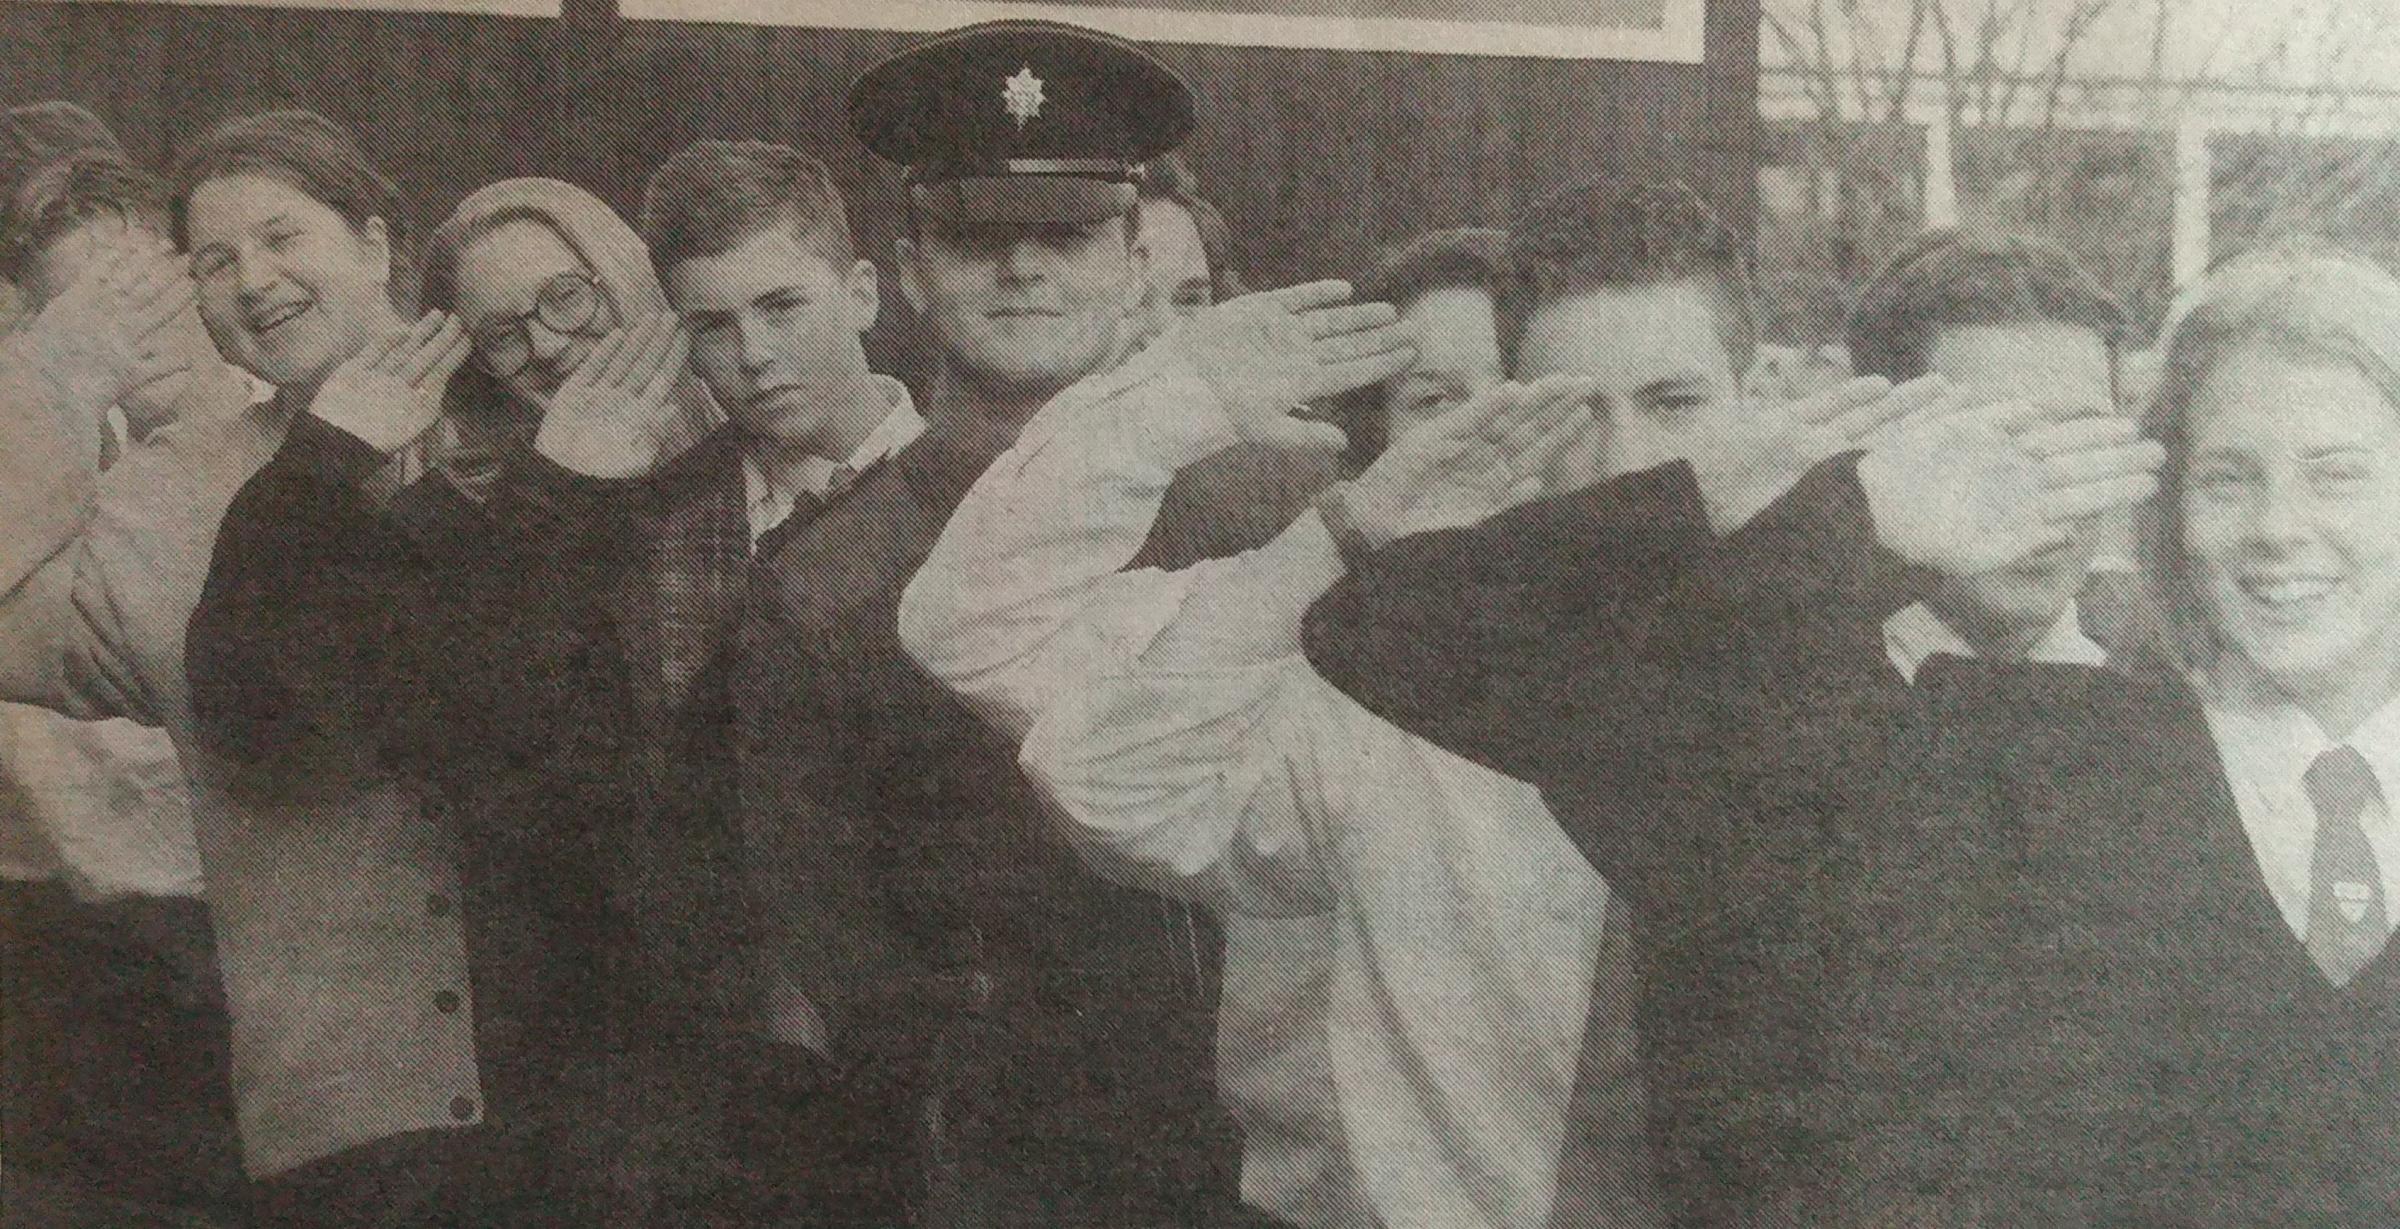 Students were on parade in November 1994 when old boy Miachael Saunders returned to his school to give a talk. He had left Nunnery Wood in 1991, eventually joining the 1st Battalion of the Worcestershbire and Sherwood Foresters